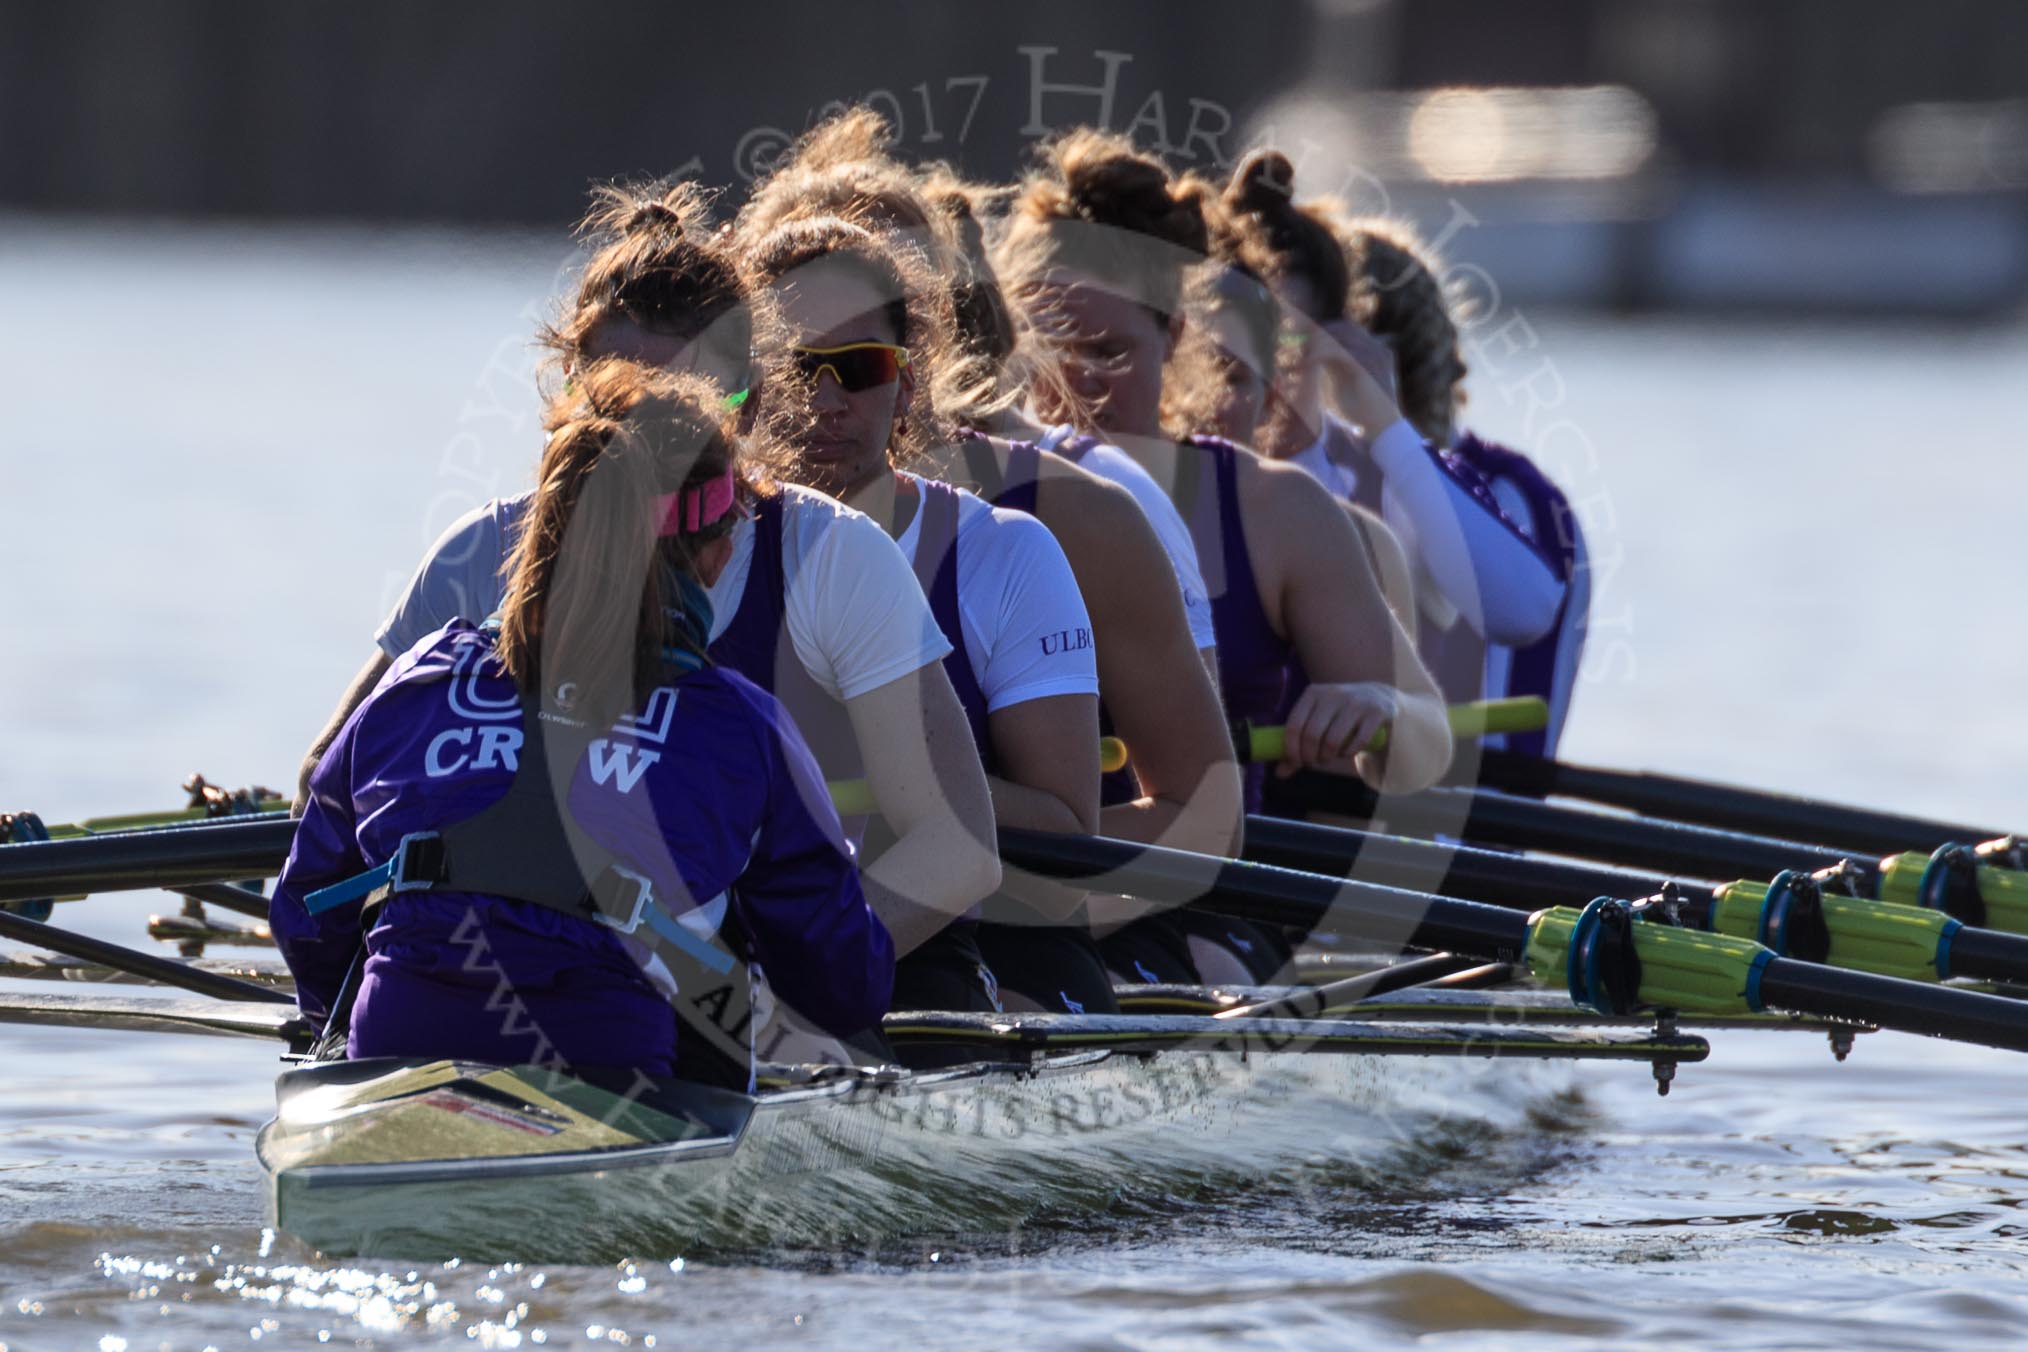 The Women's Boat Race season 2018 - fixture CUWBC vs. ULBC: The ULBC Eight after finishing the first part of the race at Hammersmith Bridge - cox Lauren Holland, stroke Issy Powel, 7 Jordan Cole-Huissan, 6 Oonagh Cousins, 5 Hannah Roberts, 4 Katherine Barnhill, 3 Fionnuala Gannon, 2 Robyn Hart-Winks, bow Ally French.
River Thames between Putney Bridge and Mortlake,
London SW15,

United Kingdom,
on 17 February 2018 at 13:26, image #101